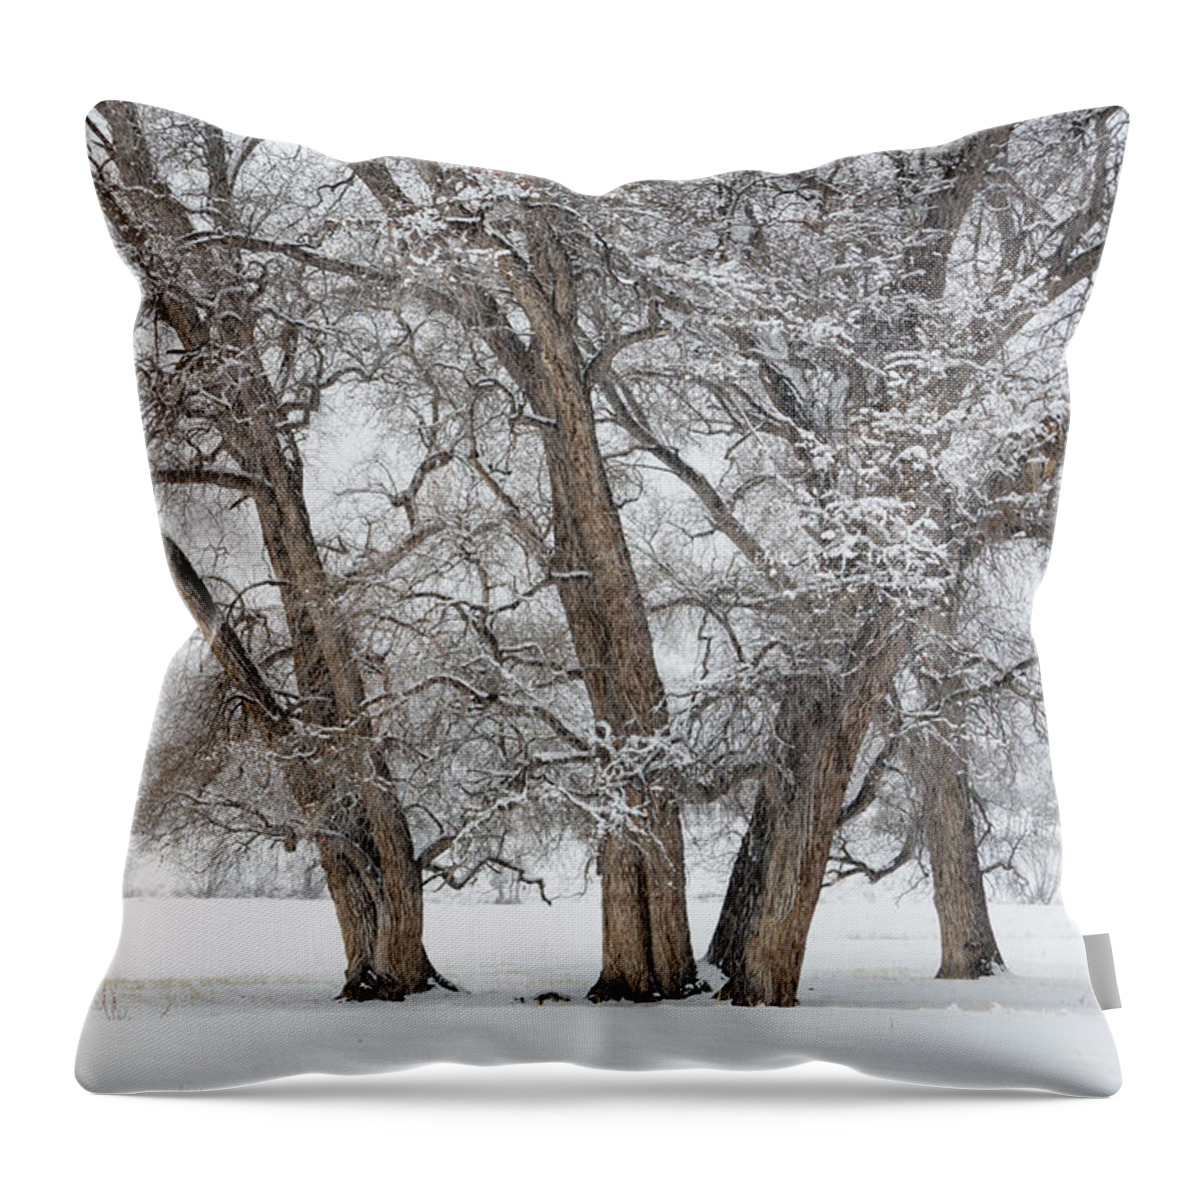 Cottonwood Throw Pillow featuring the photograph Cottonwood Companions by Denise Bush